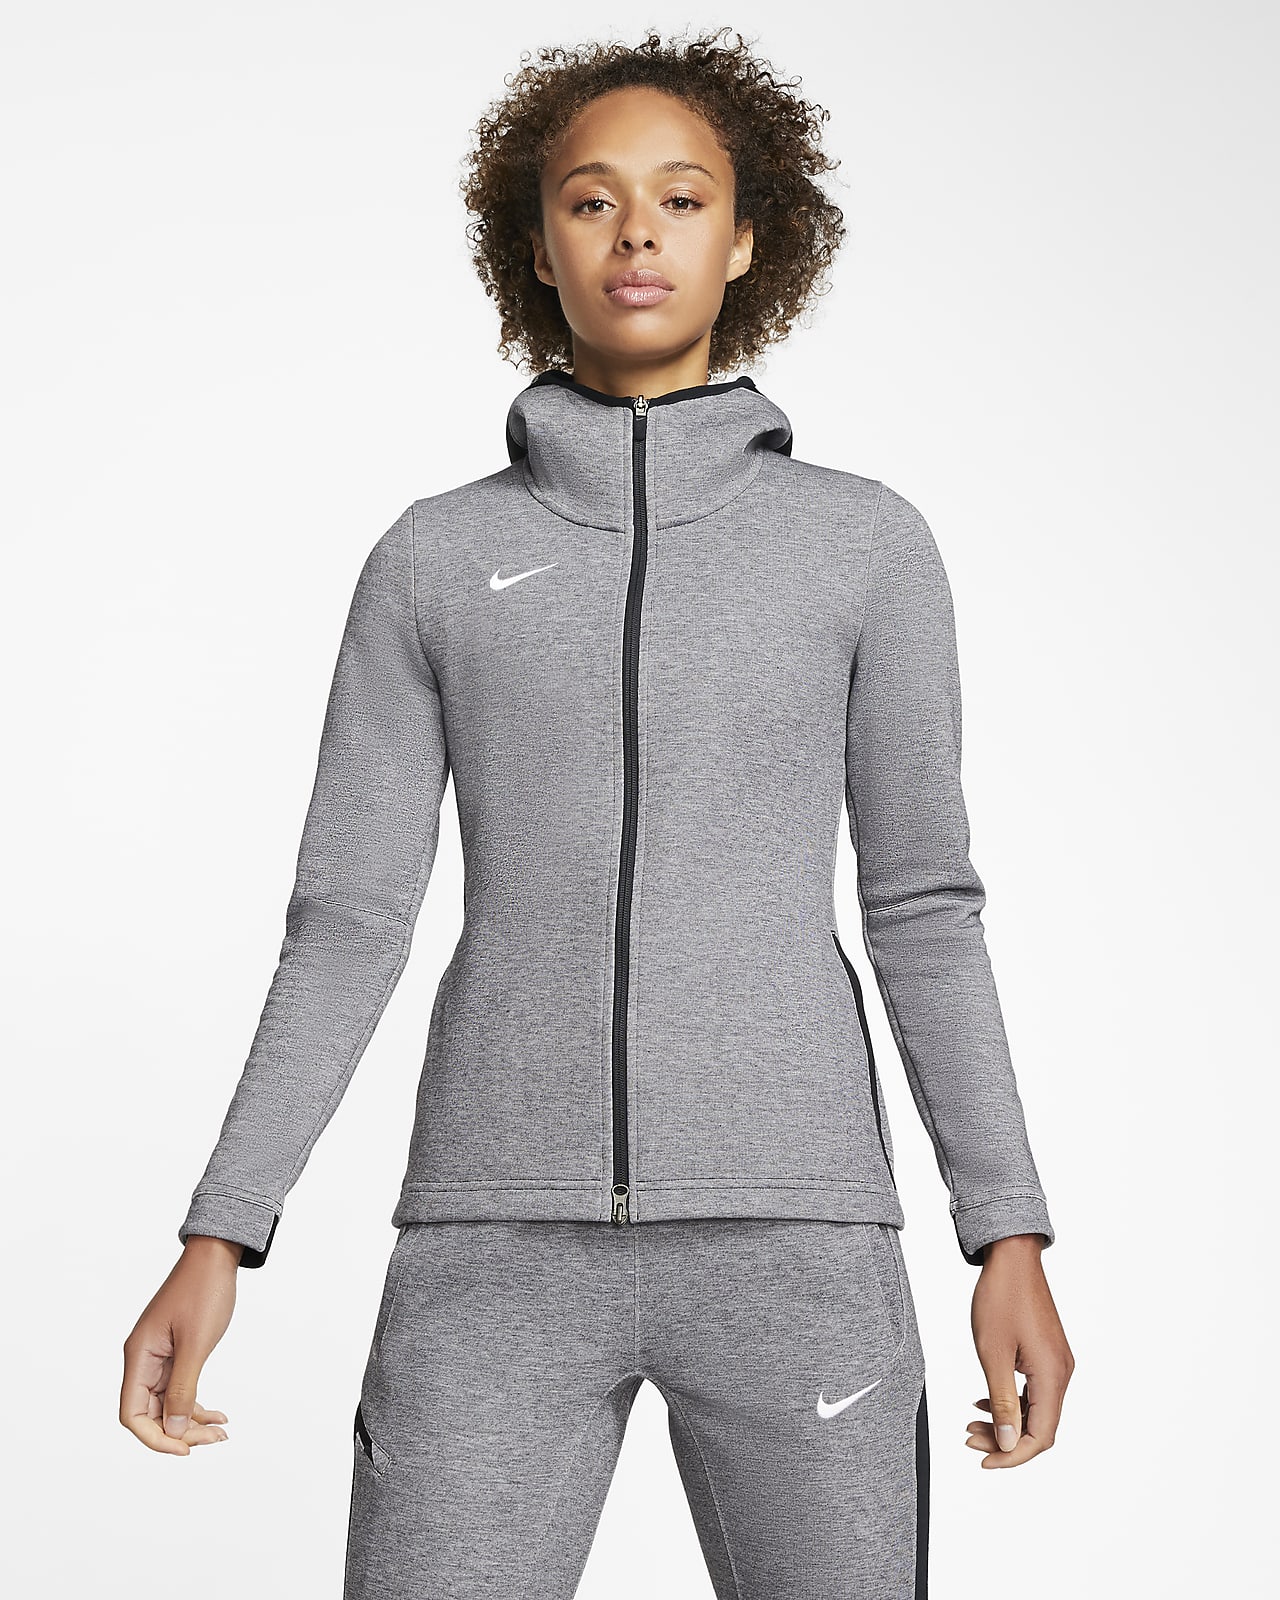 women's warm up suits nike